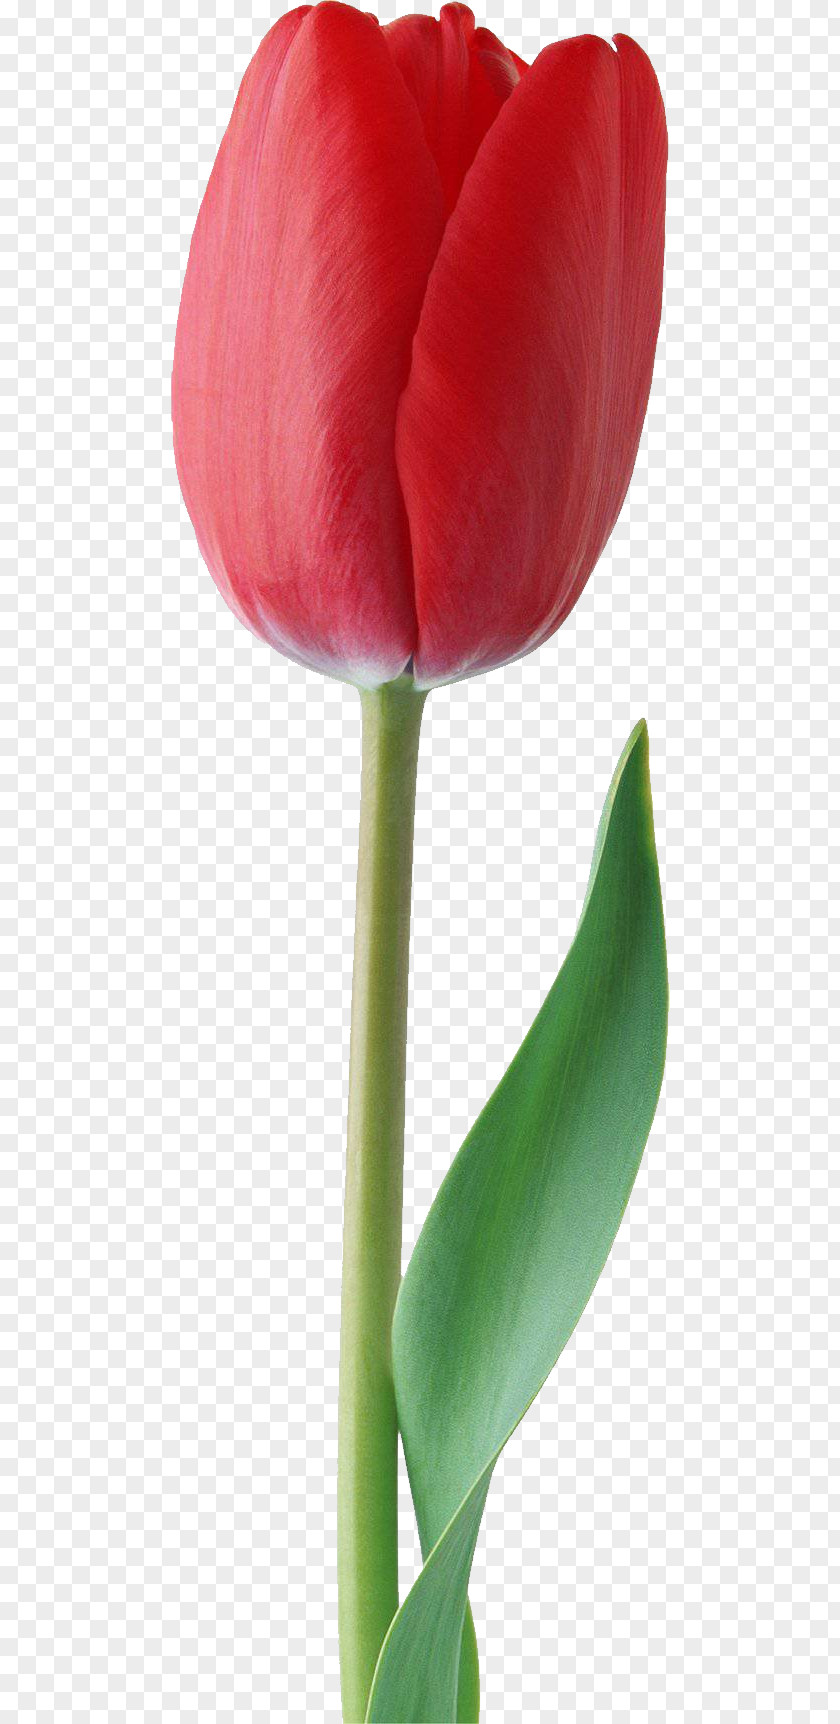 Tulip PNG clipart PNG